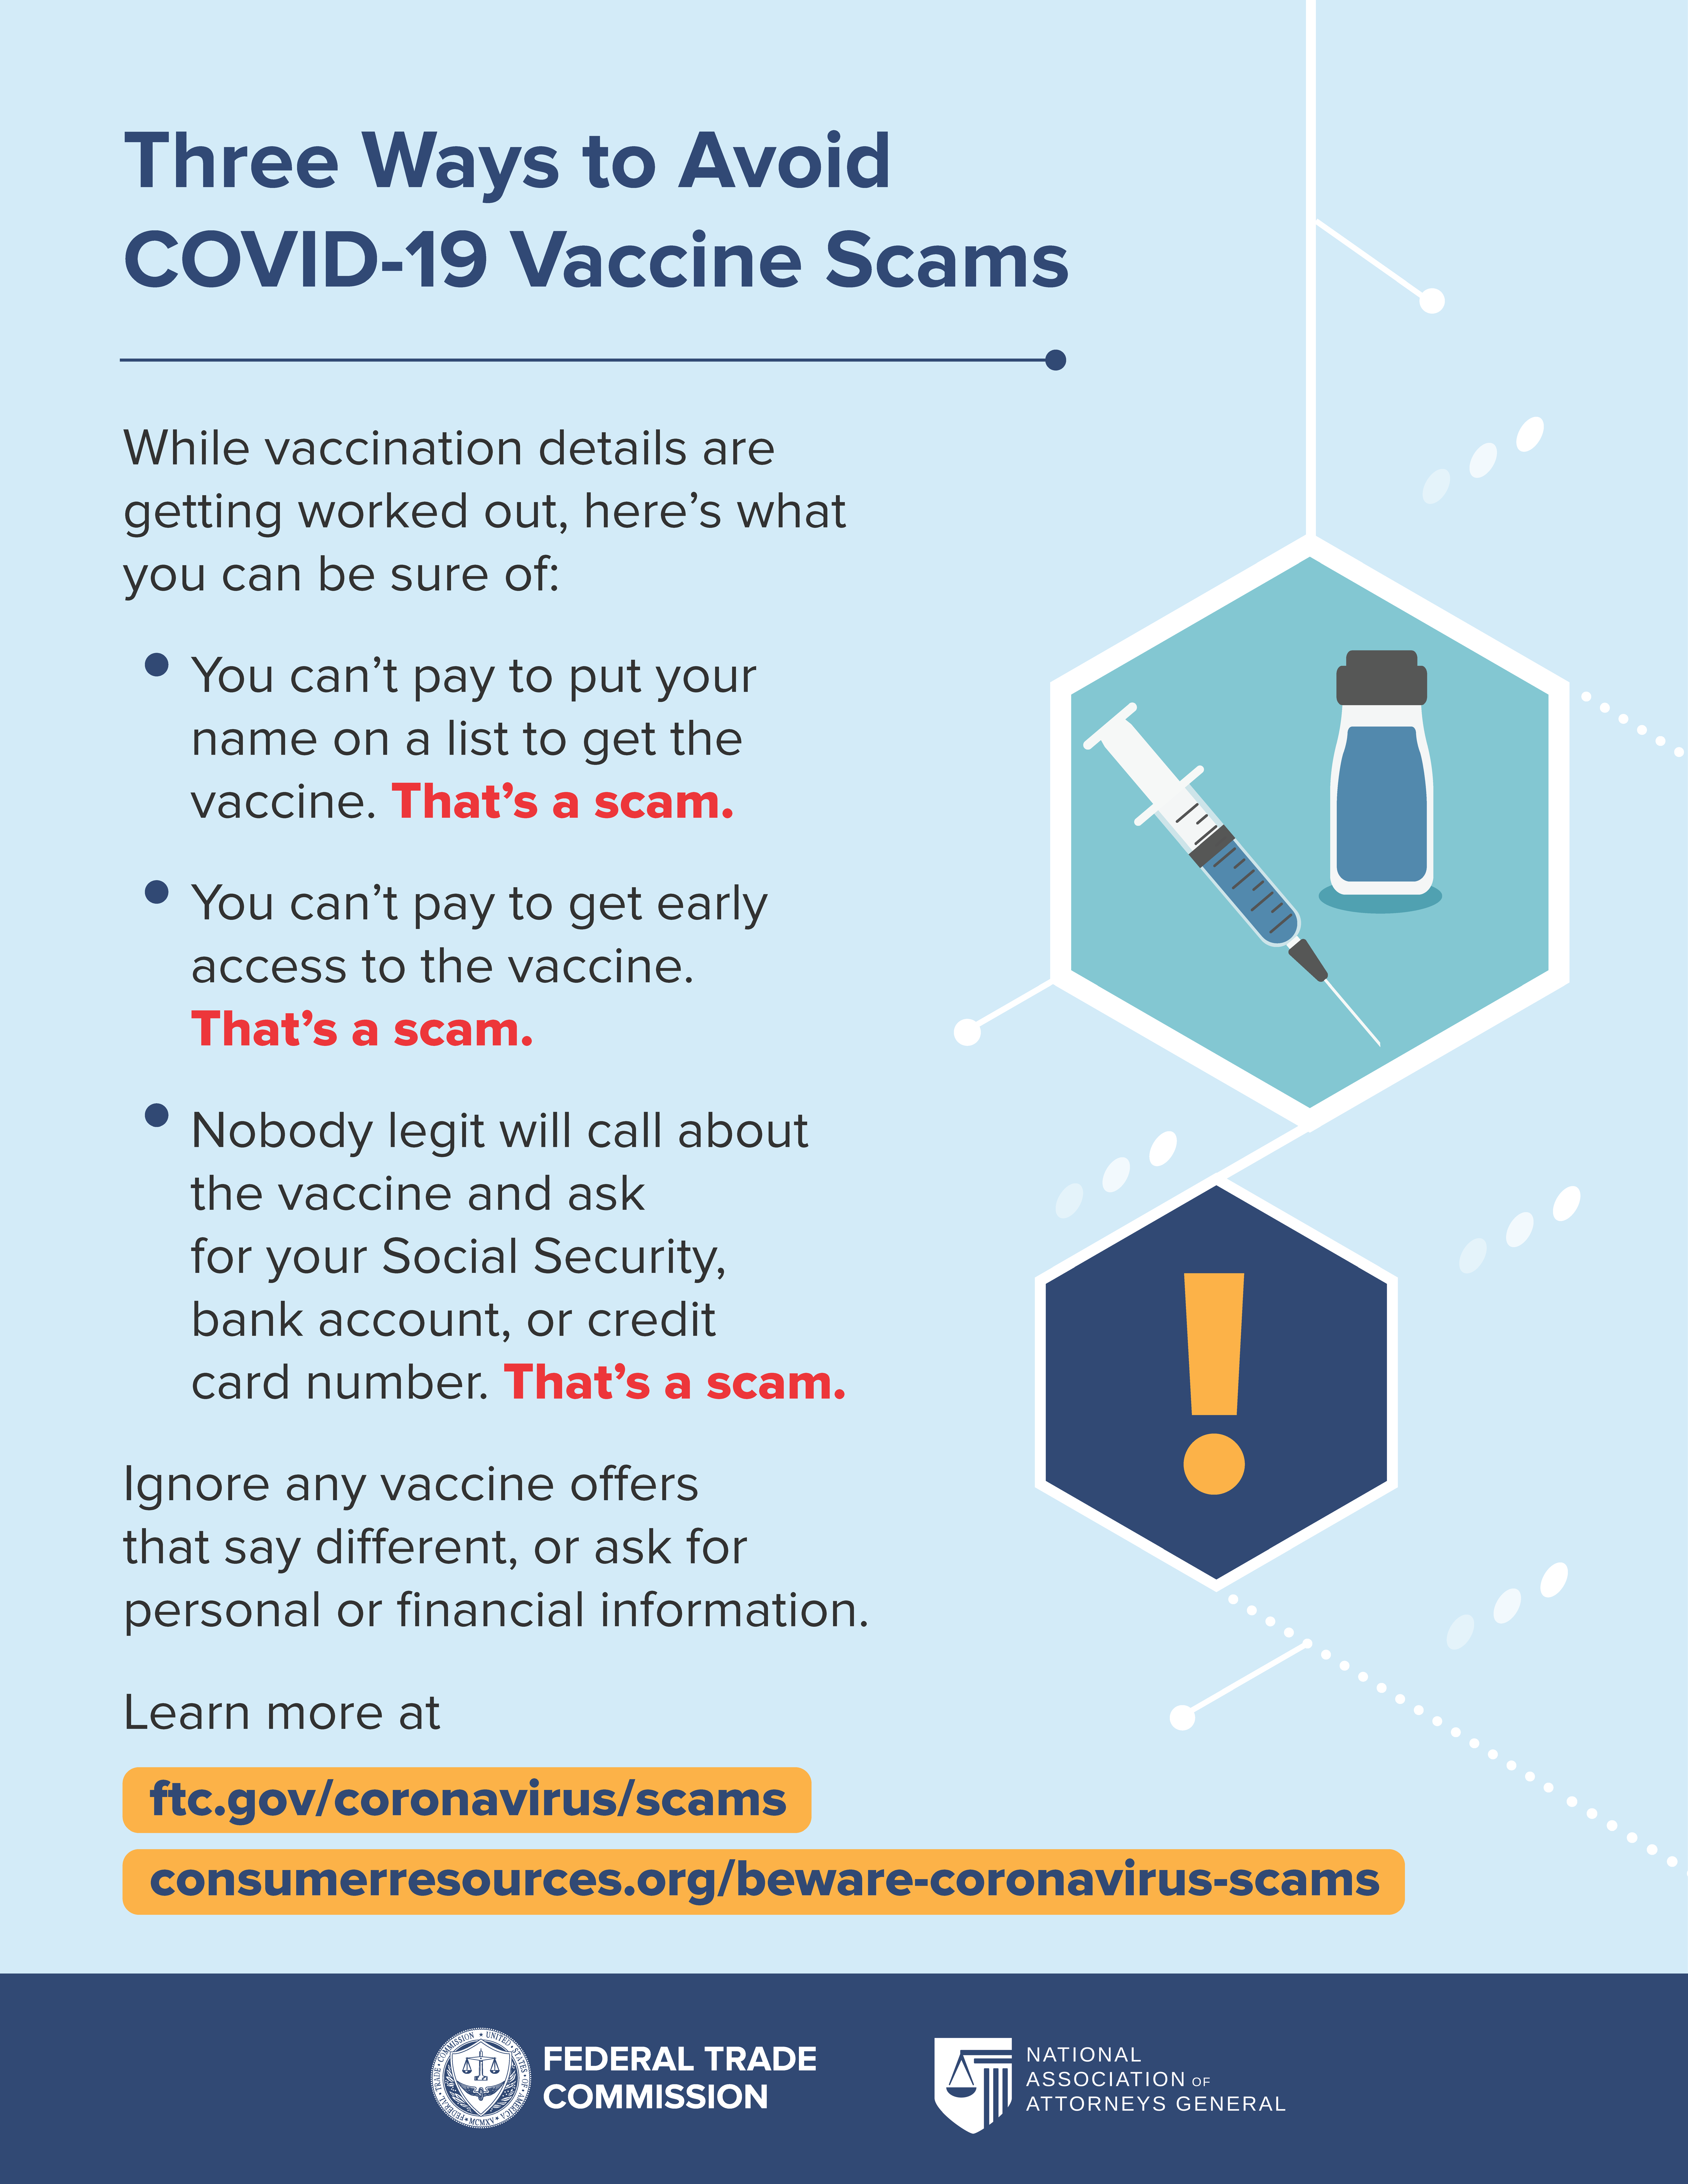 Three Ways to Avoid COVID-19 Vaccine Scams Infographic